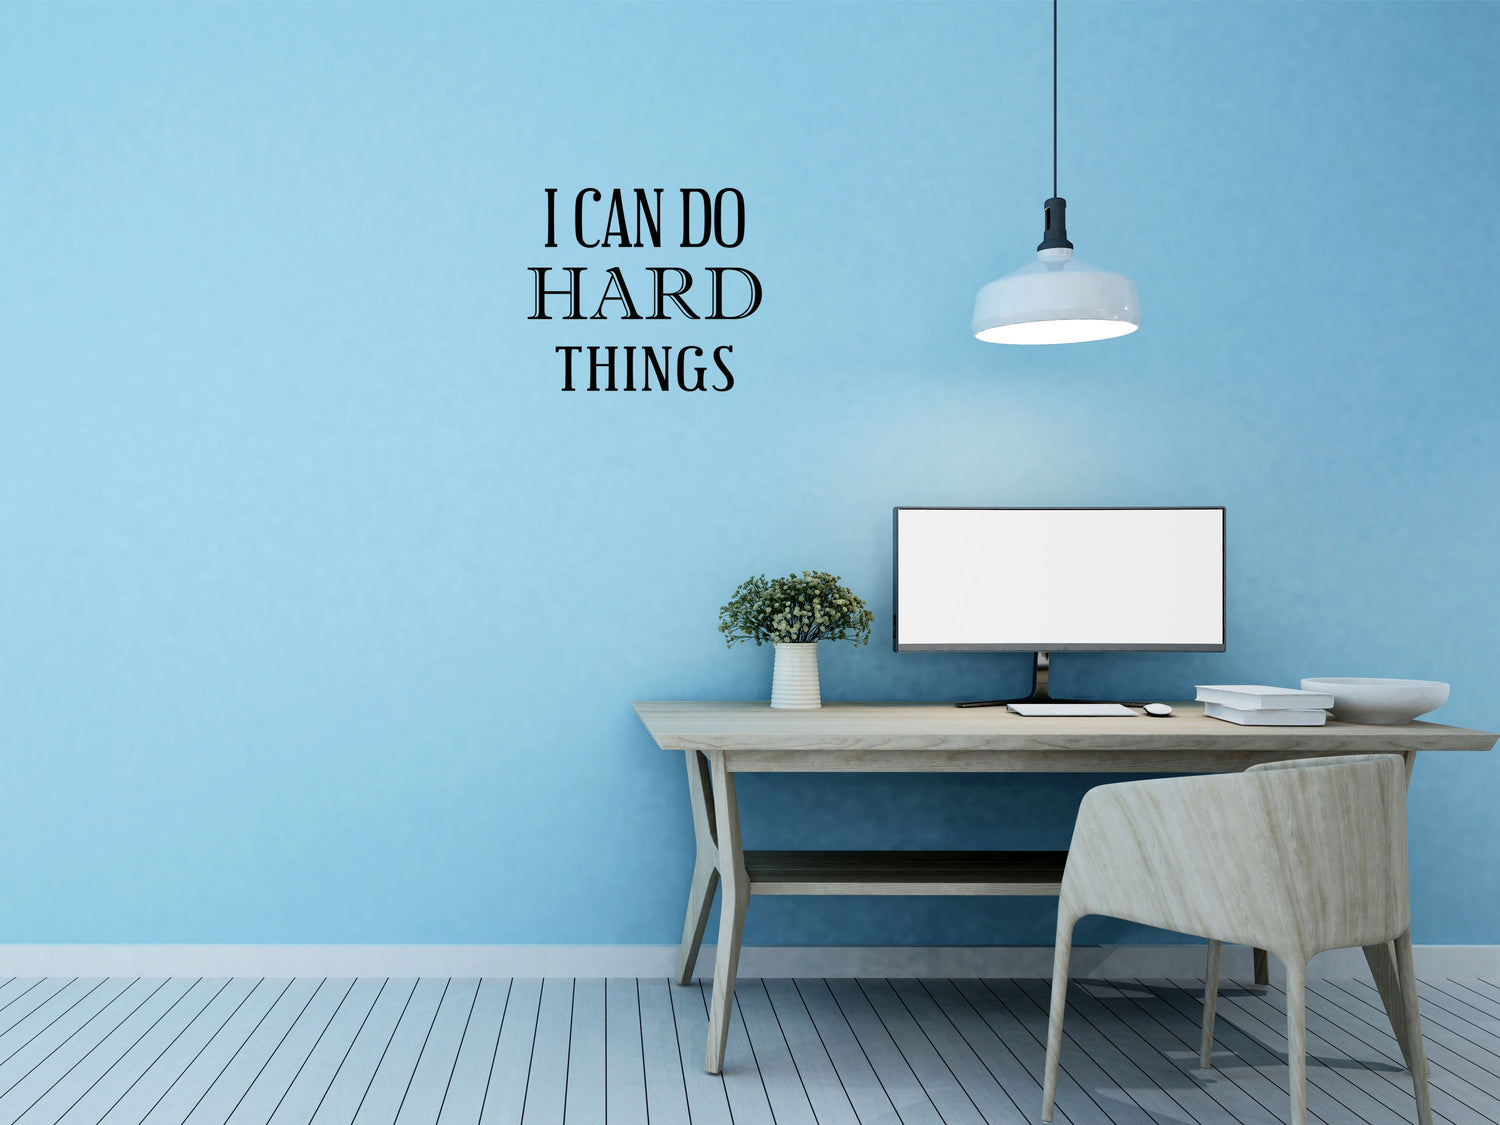 I Can Do Hard Things Vinyl Wall Decal - Motivational Decal I Can Do Hard Things Sign - Inspirational Quote Decal Vinyl Wall Decal Inspirational Wall Signs 